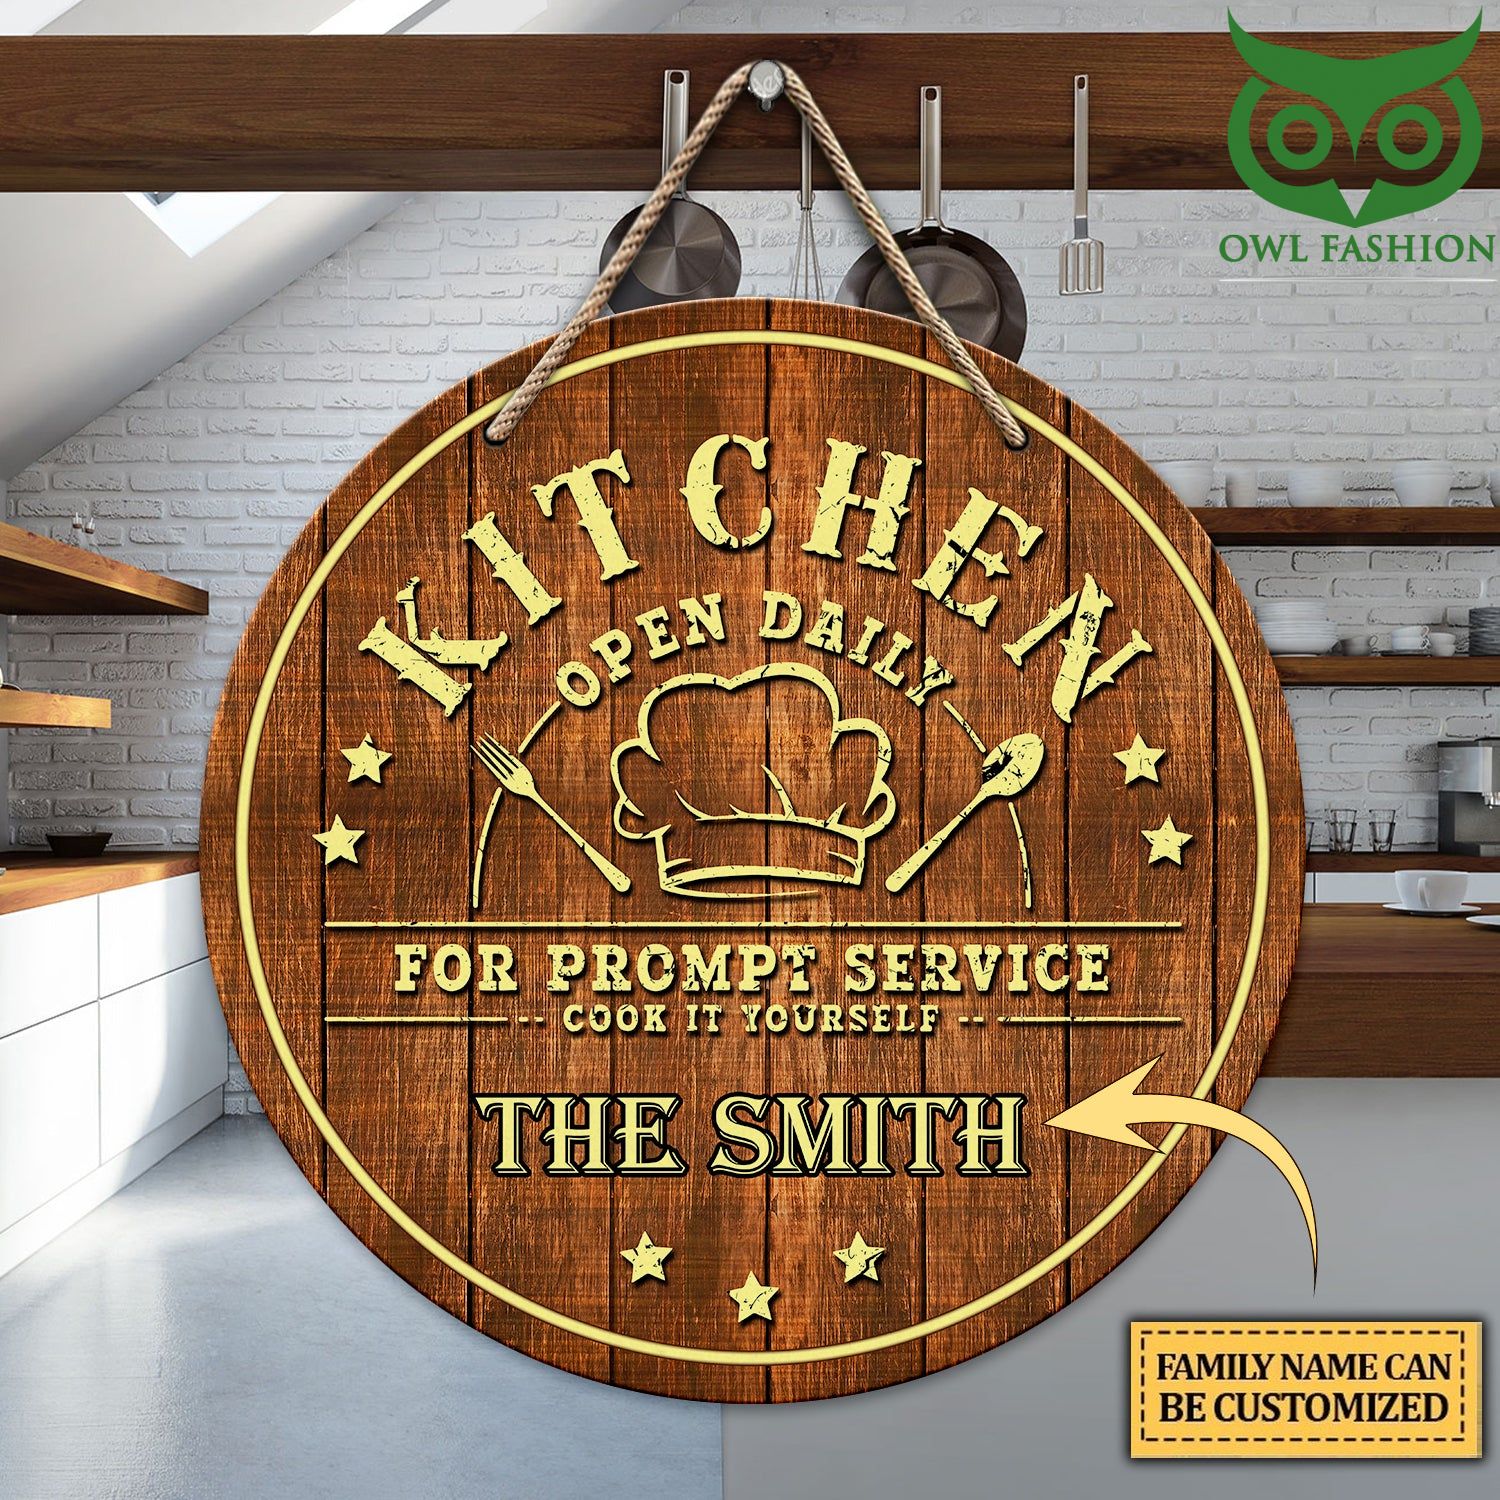 99 Chef Kitchen open daily personalized wood sign